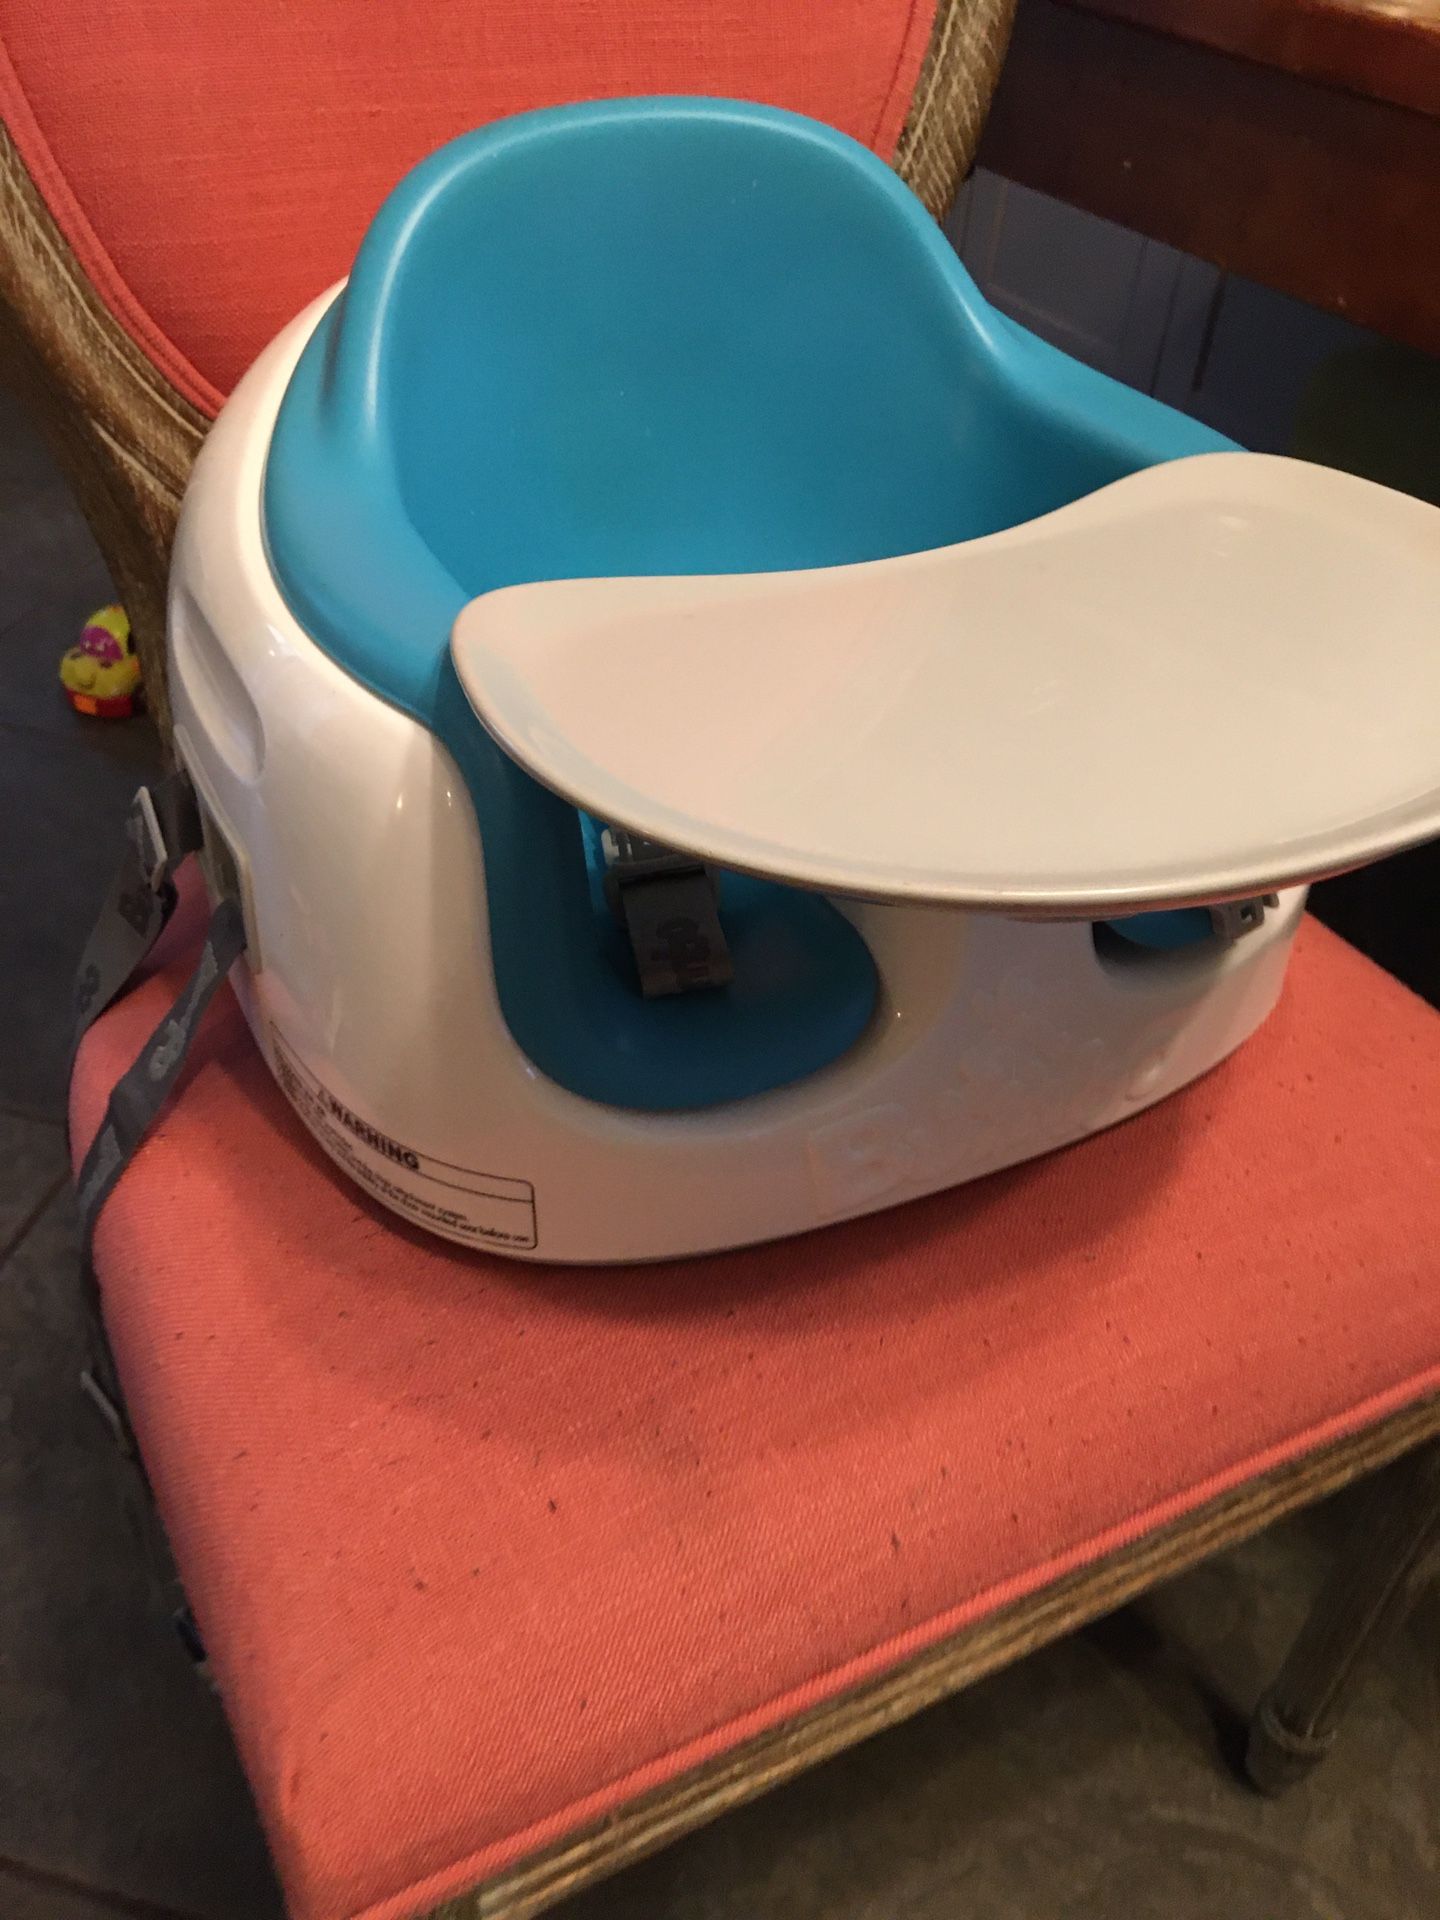 NEW BUMBO BOOSTER SEAT WITH TRAY